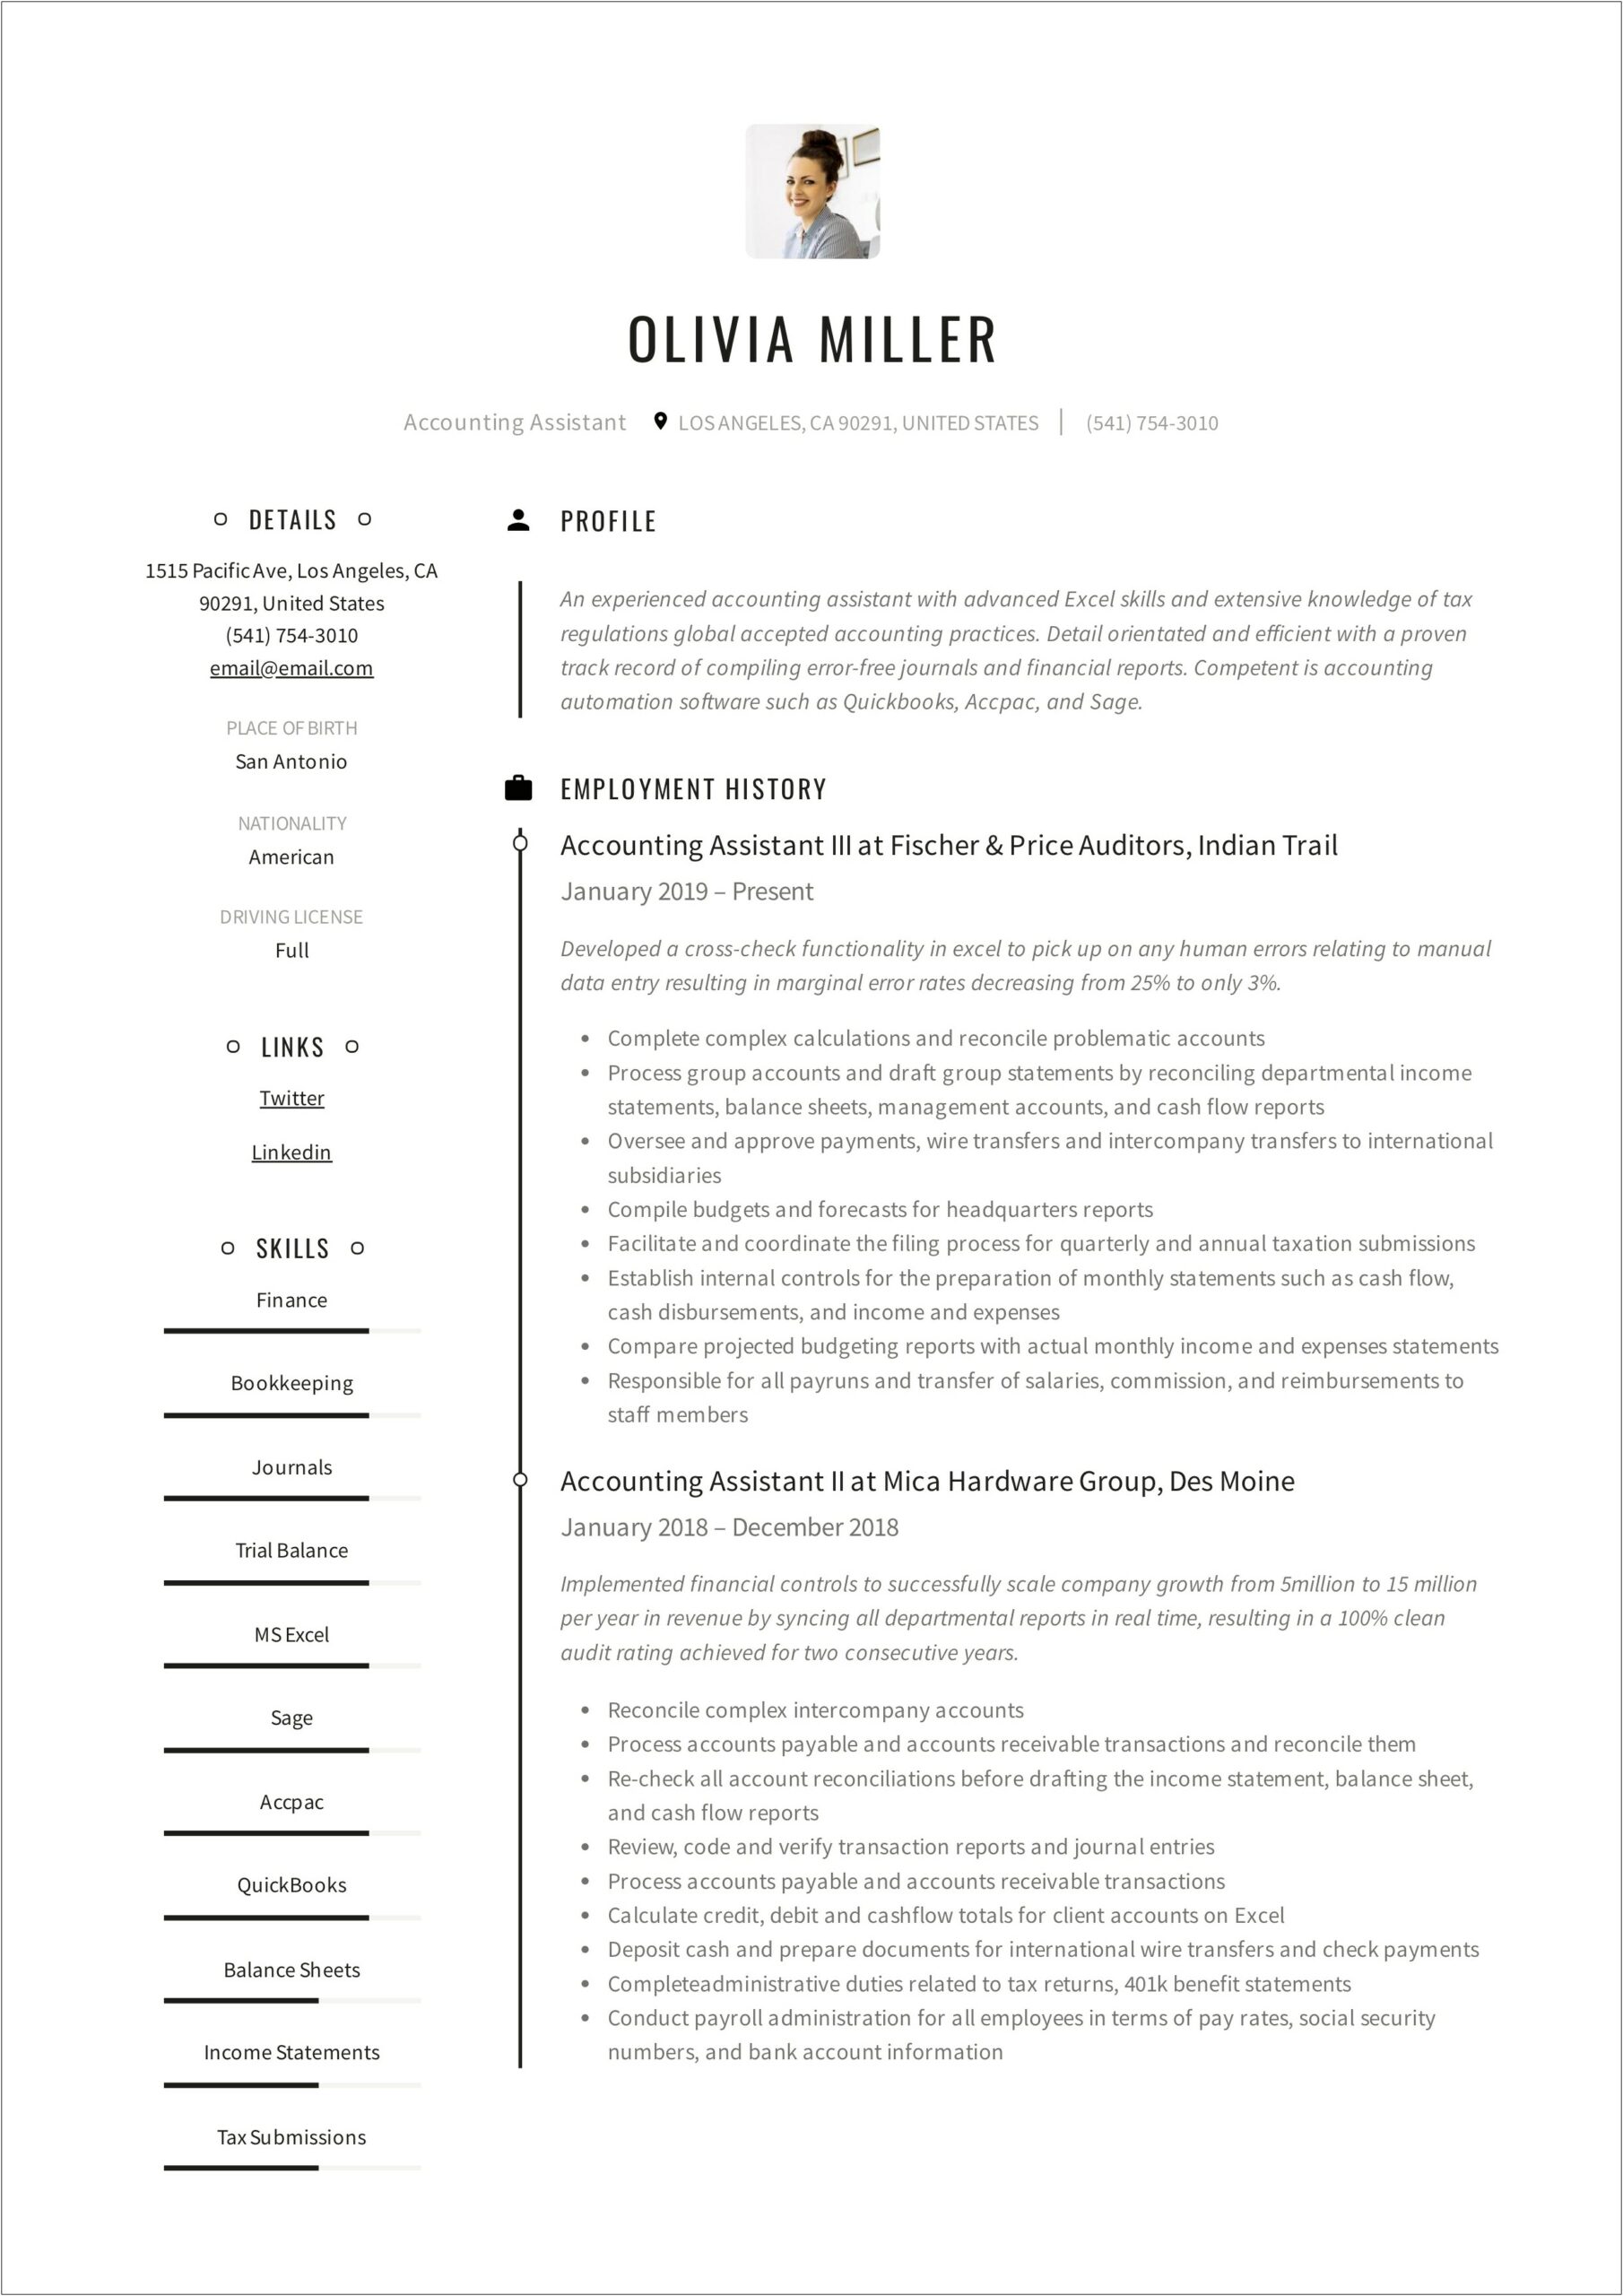 Chartered Accountant Resume Samples India